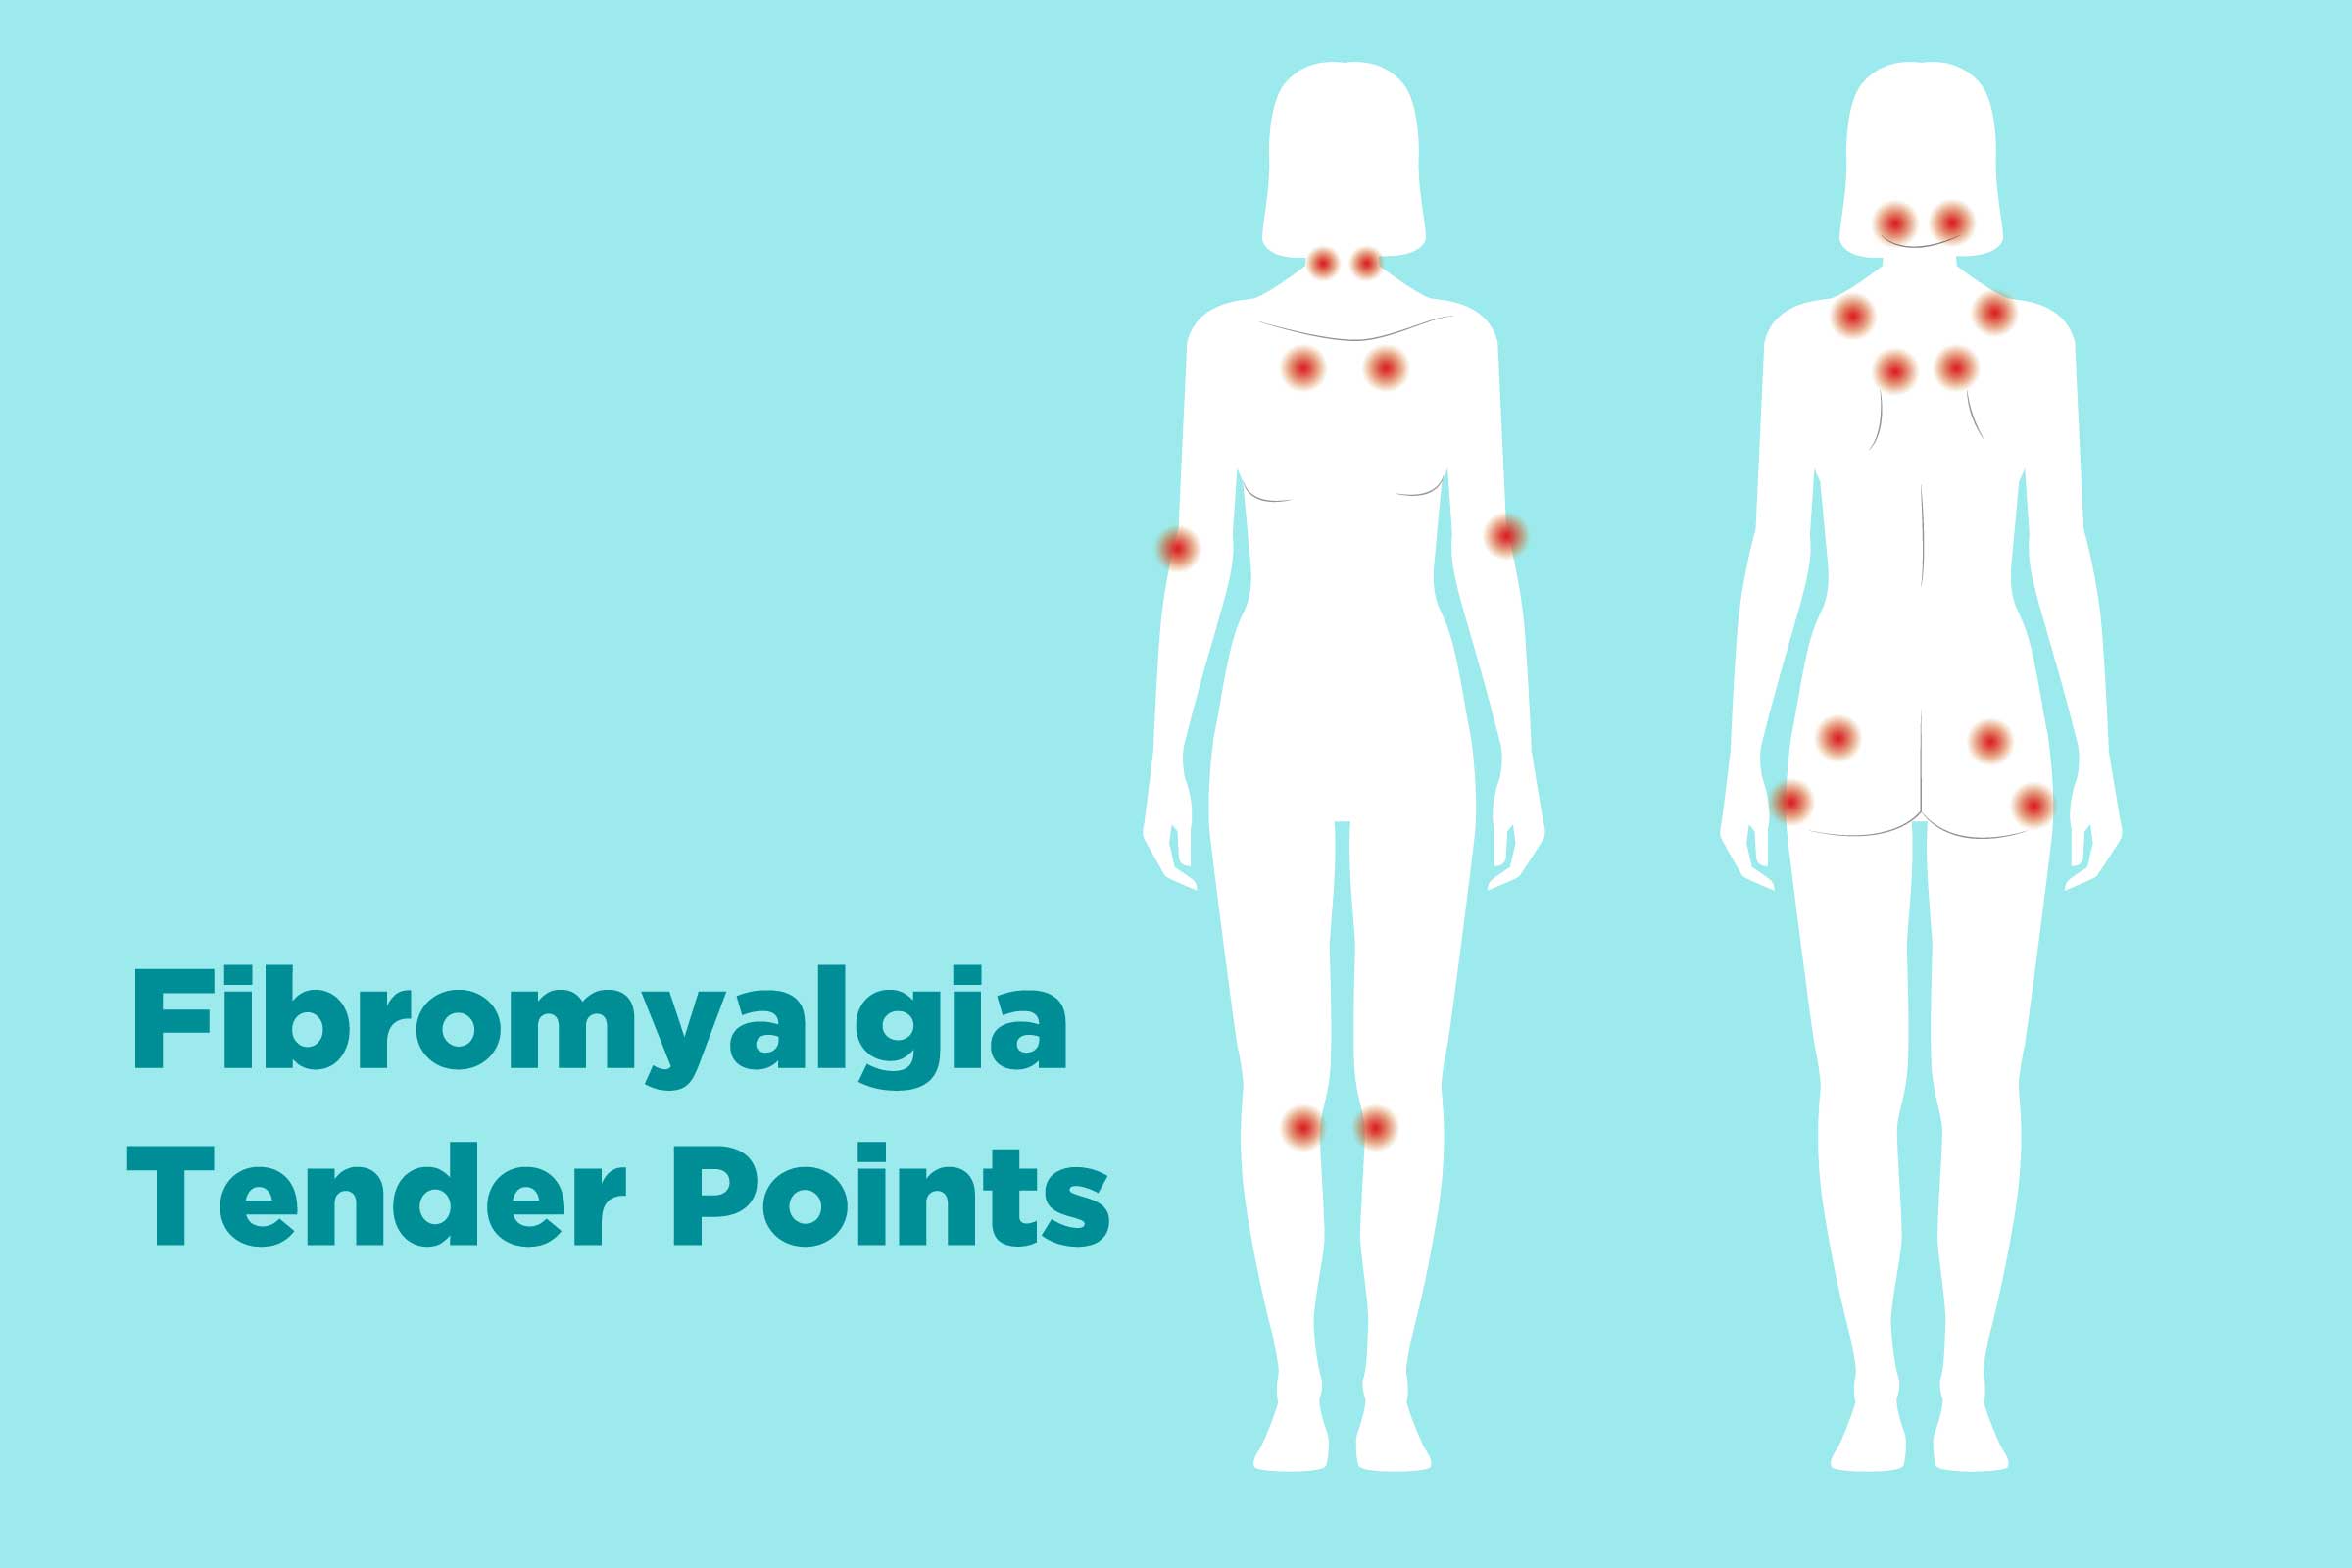 How To Live With Fibromyalgia: A Personal Story Of Coping